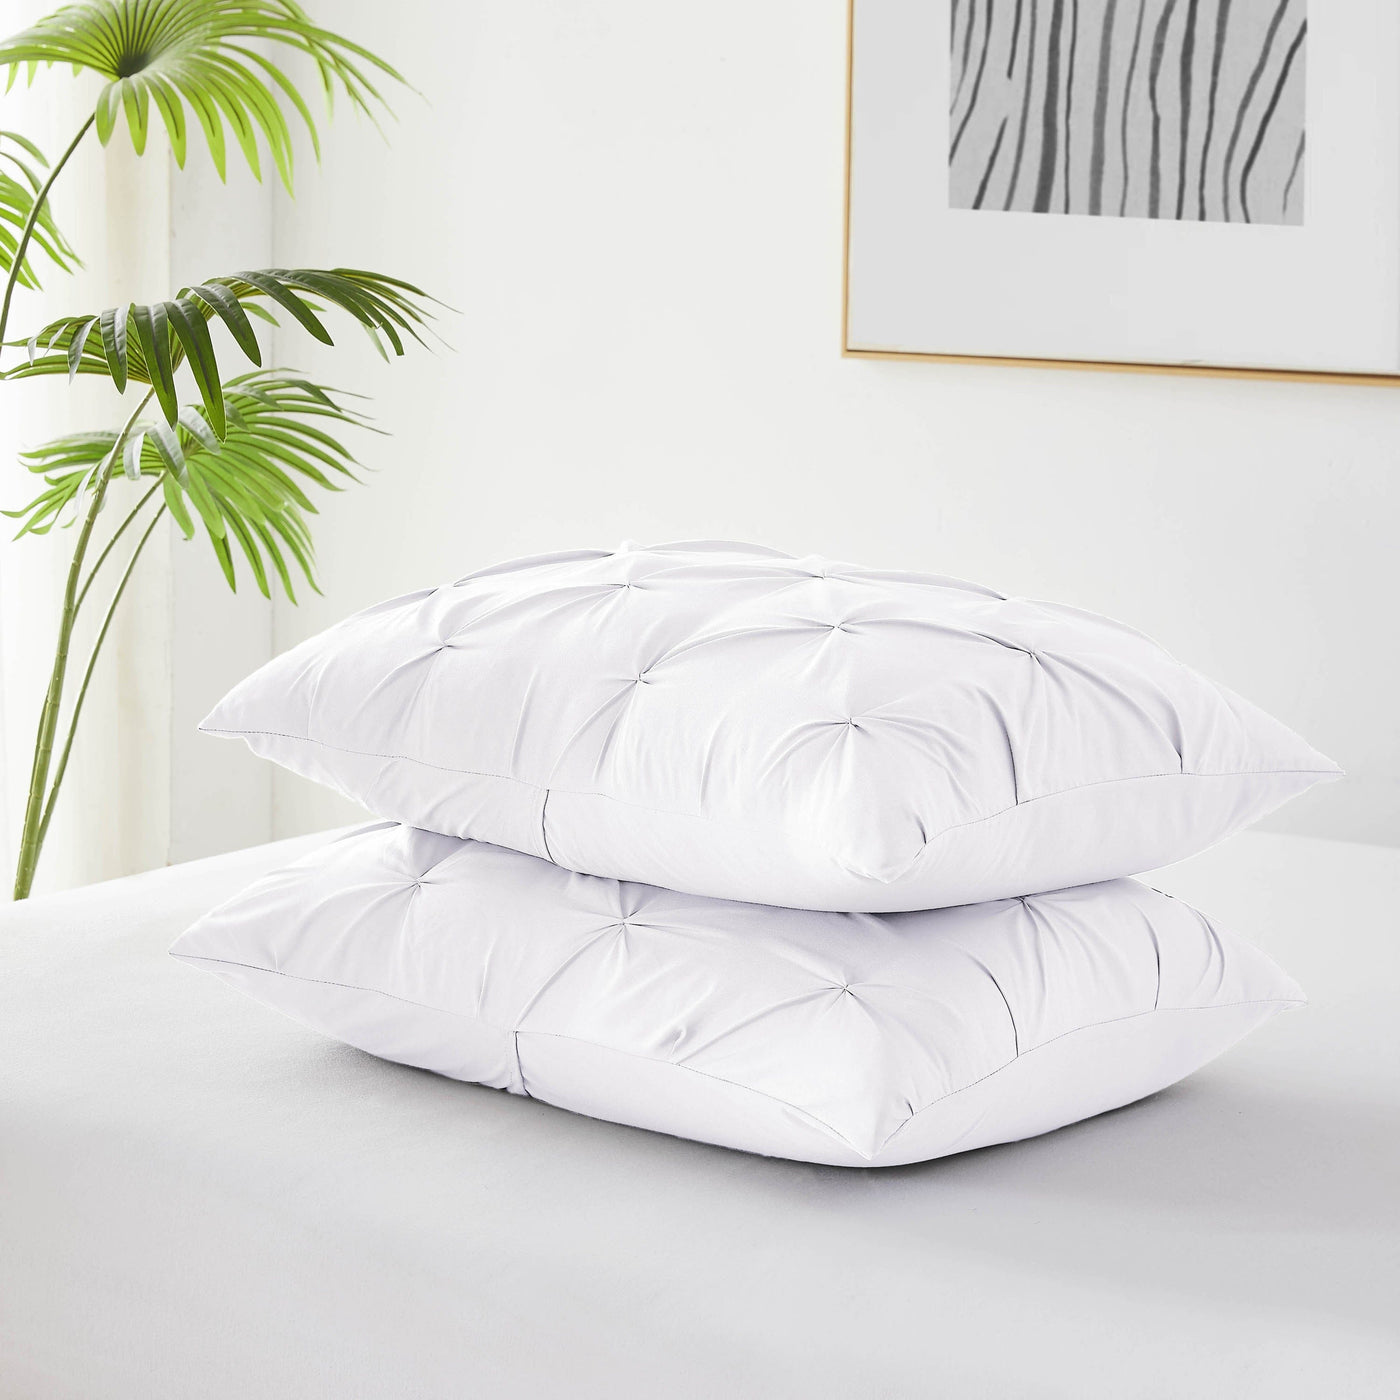 Detailed Shams Image of Pintuck Pinch Pleated Duvet Cover Set in Bright White#color_vilano-bright-white